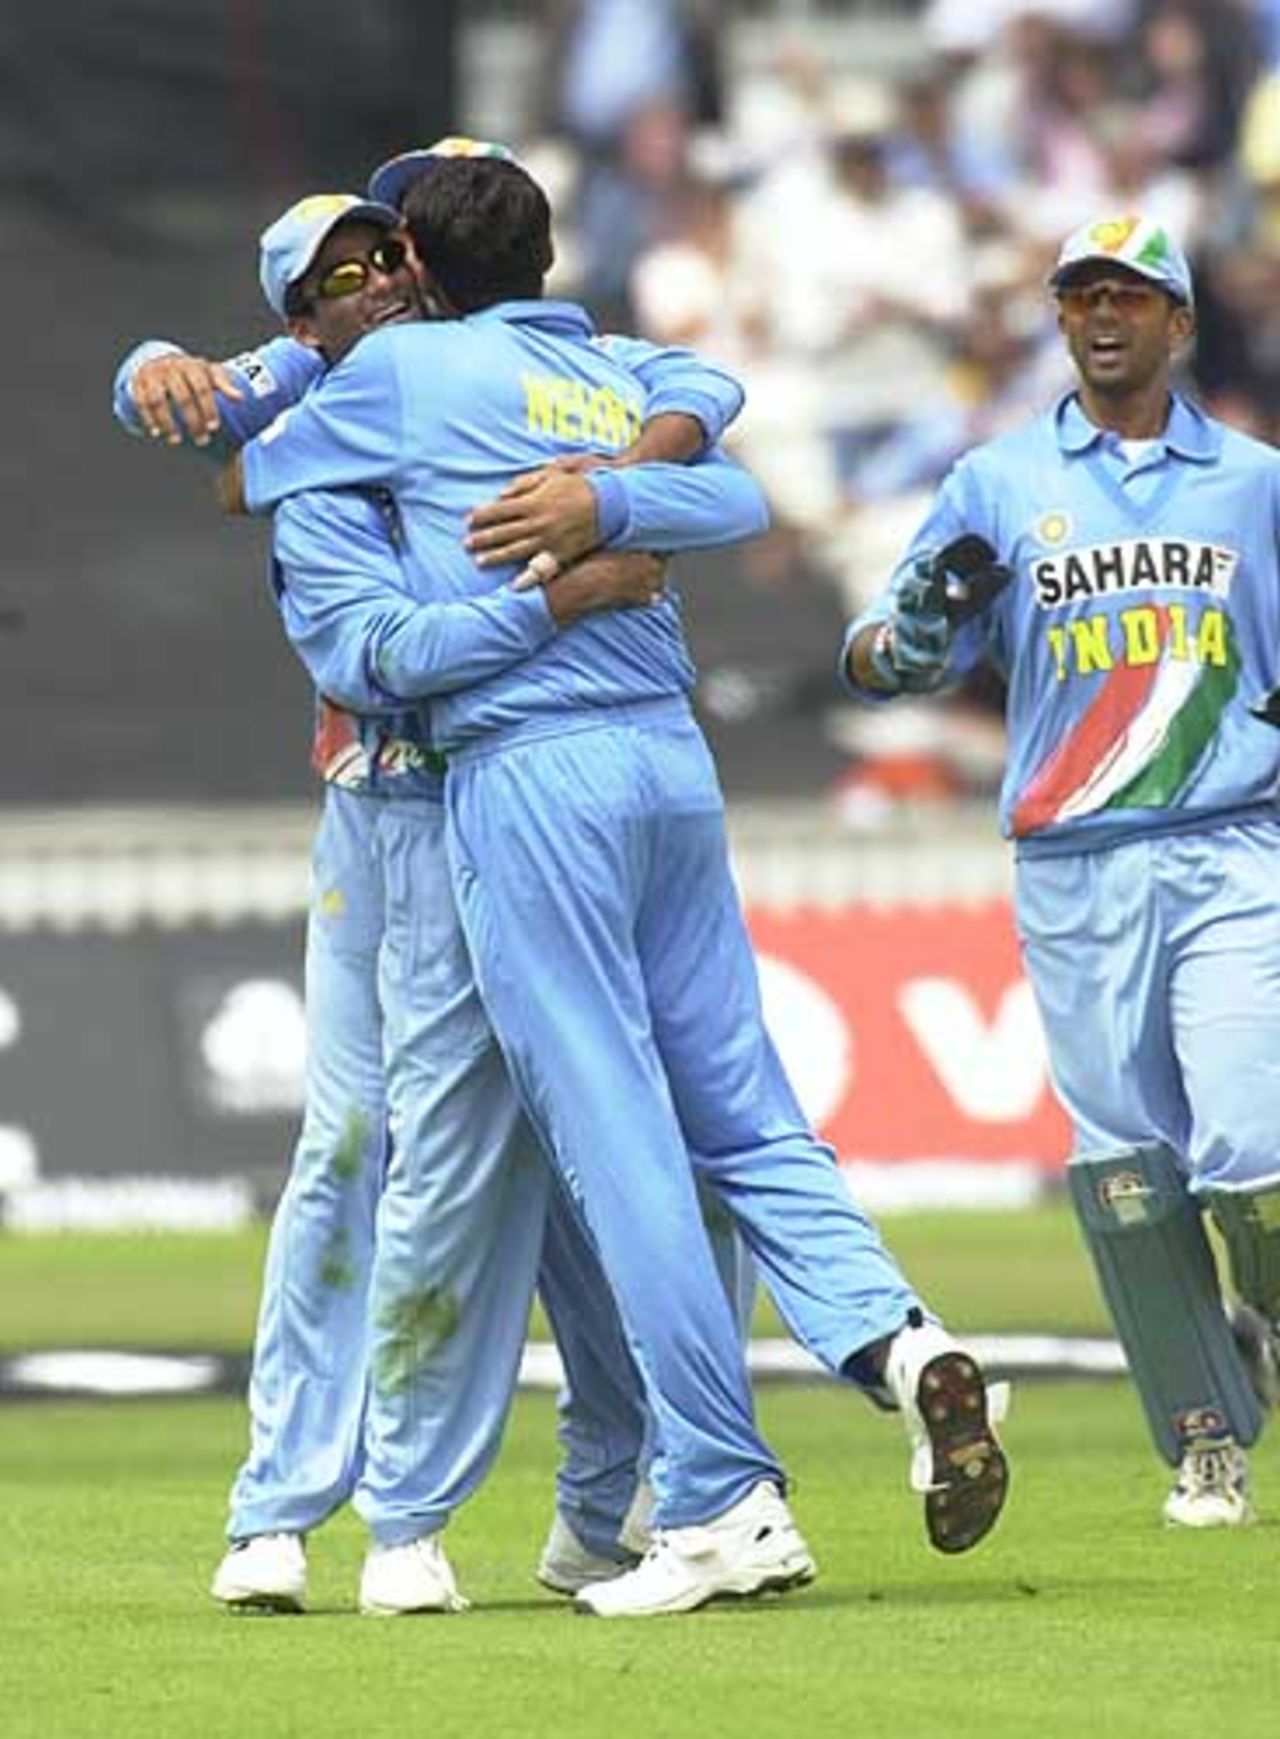 Nehra and Kaif combine after they have dismissed Chandana, India v Sri Lanka, NatWest Series, The Oval, 30 Jun 2002